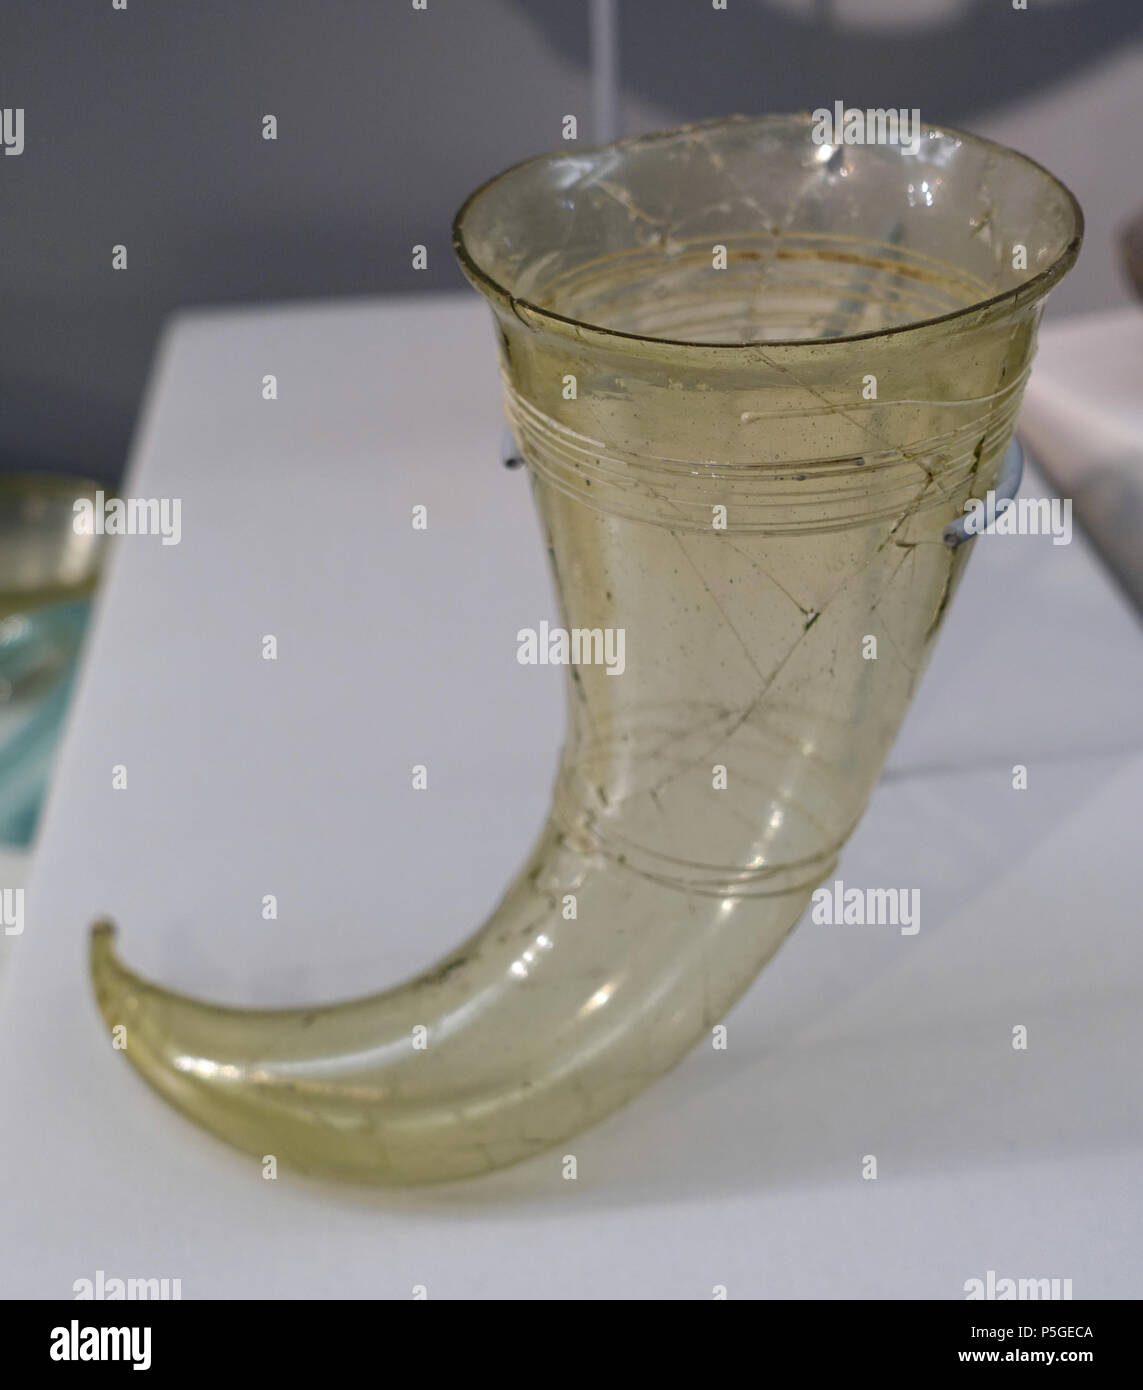 N/A. English: Exhibit in the Cinquantenaire Museum - Brussels, Belgium. 22 April 2016, 07:42:12. Daderot 480 Drinking horn, tomb 250, Bossut-Gottechain, Brabant, 530-570 AD, glass DSC08767 Stock Photo